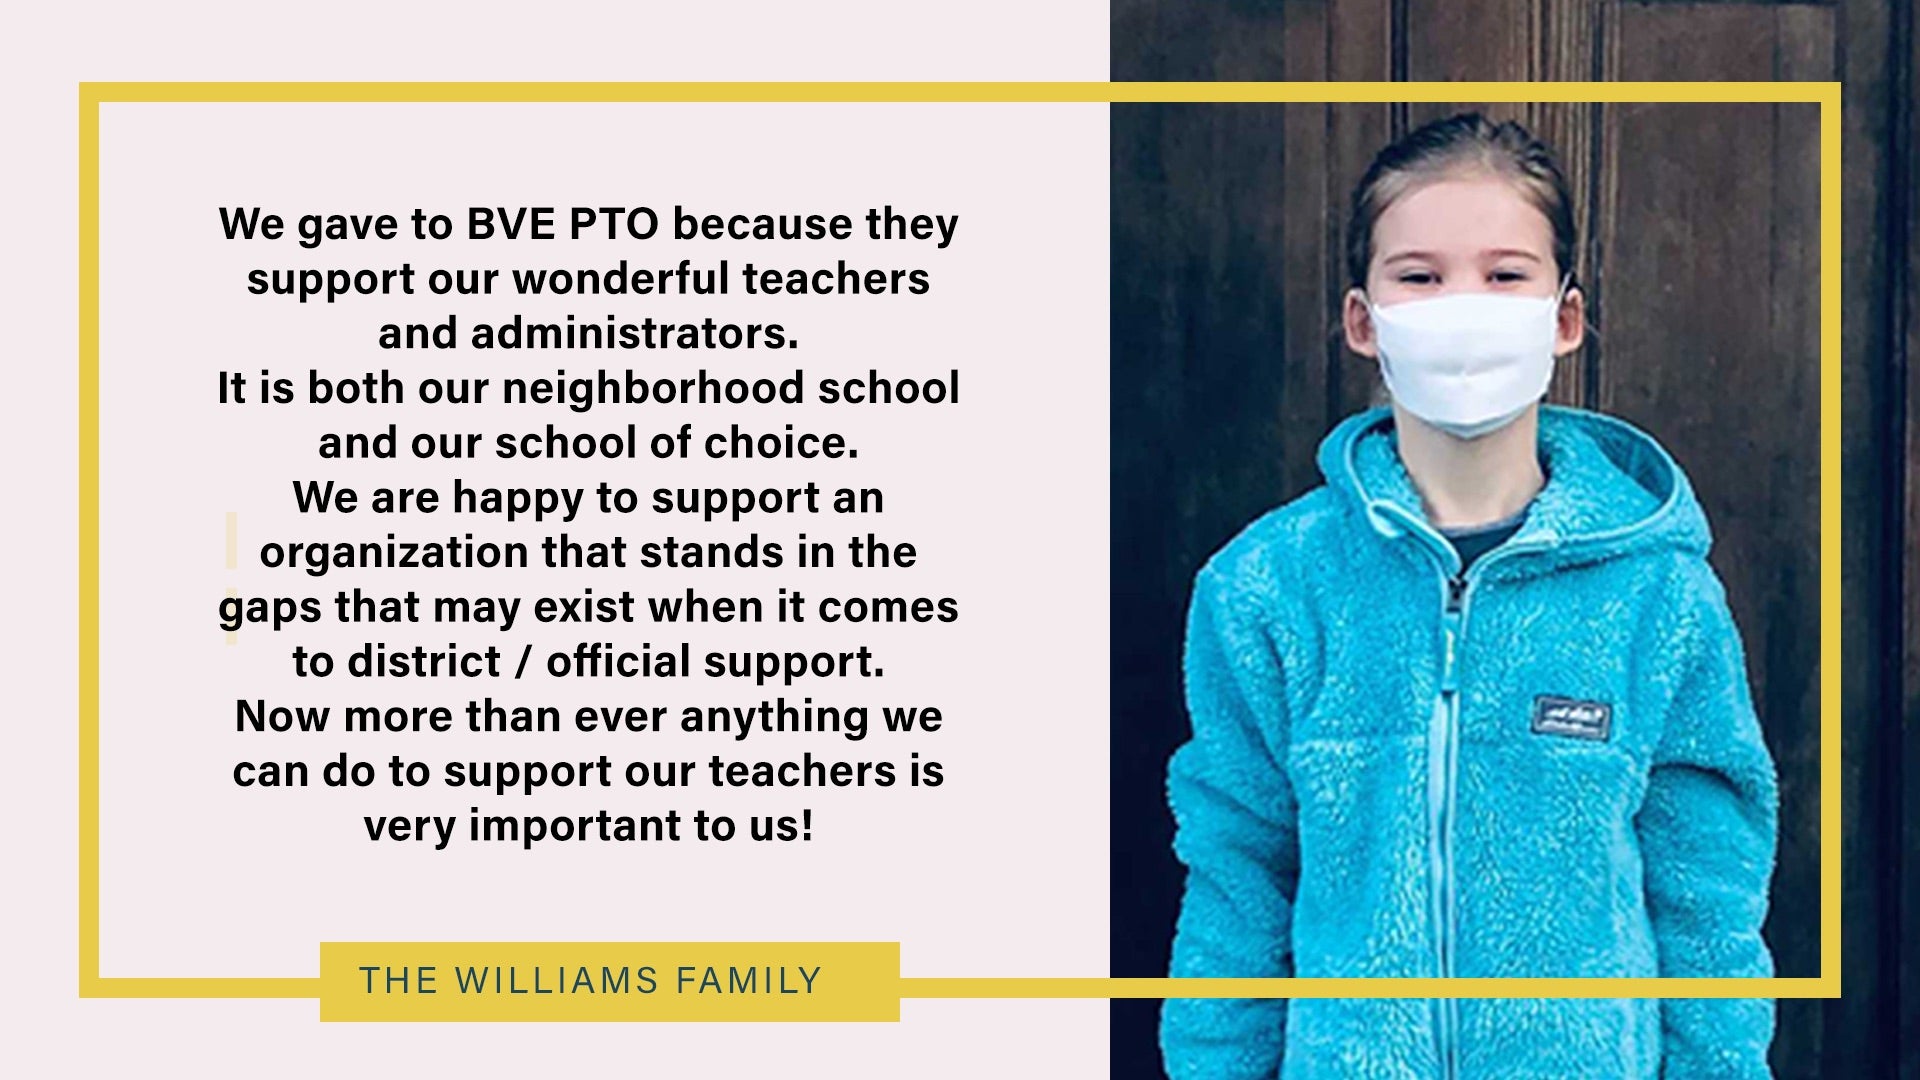 We gave to BVE PTO because they support our wonderful teachers. It is both our neighborhood school and our school of choice. We are happy to support an organization that stands in the gaps that may exist when it comes to district/official support. Now more than ever anything we can do to support our teachers is very important to us. - The Williams Family